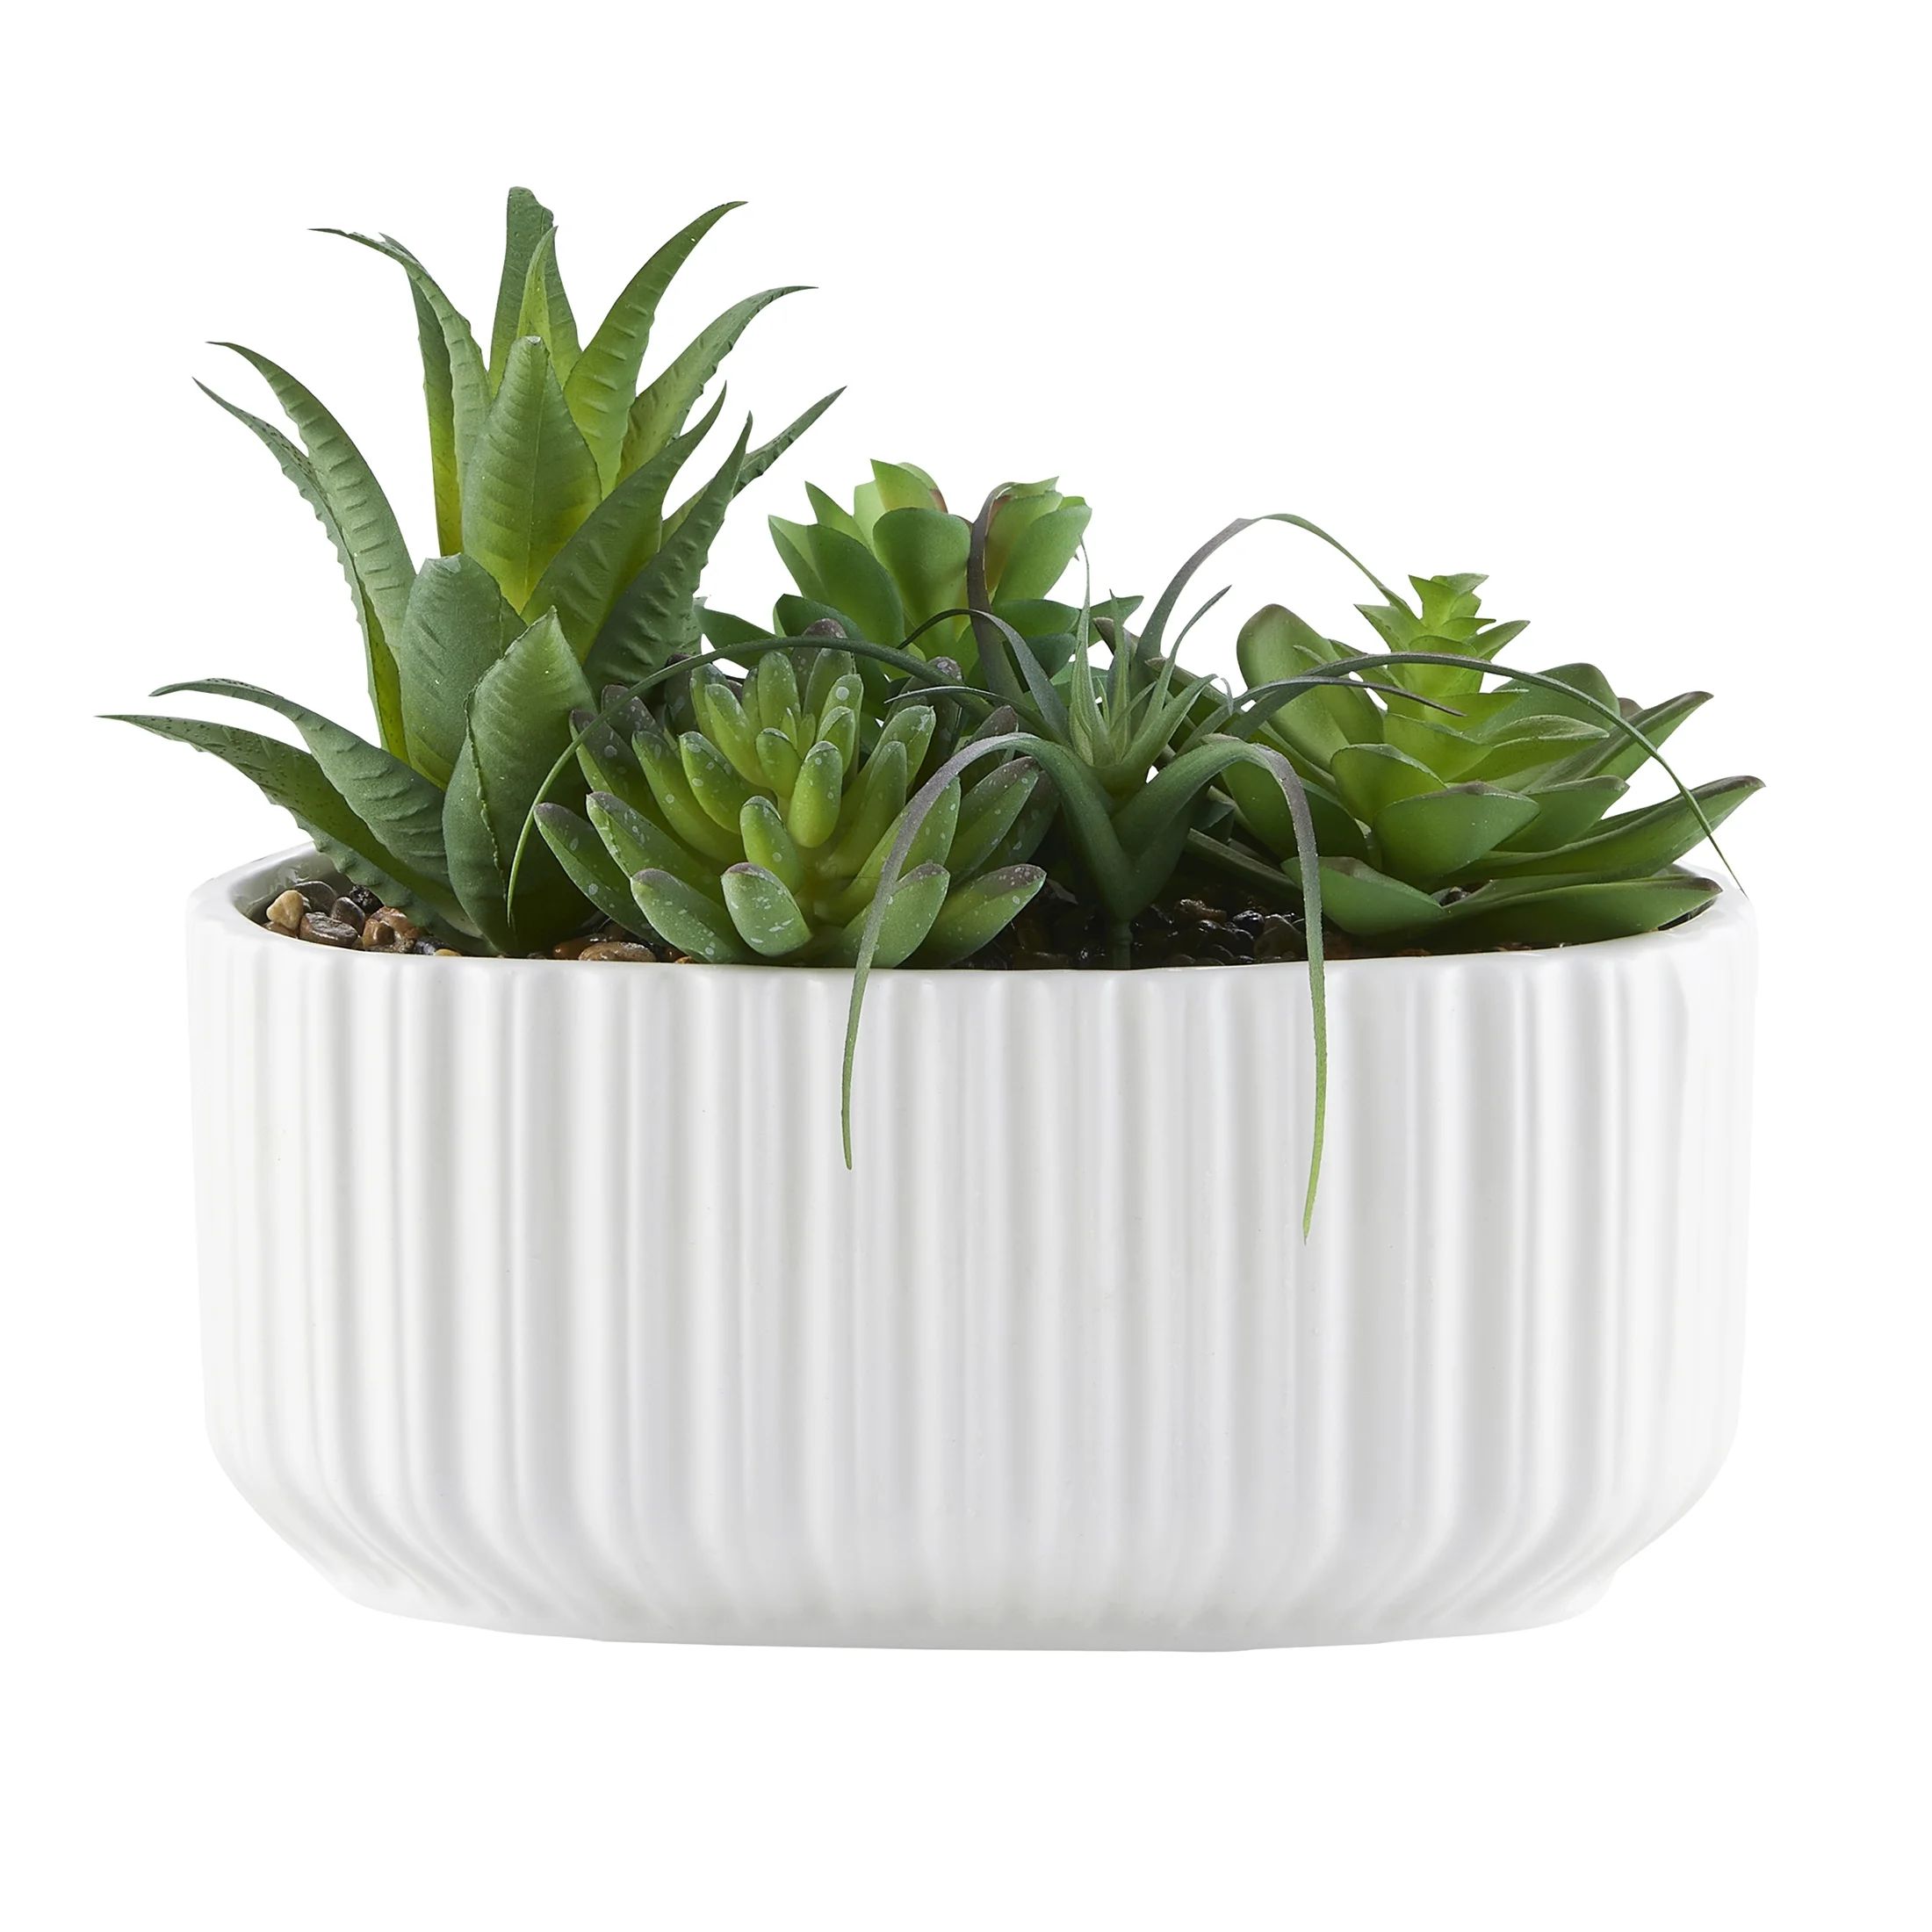 Mixed Green Faux Succulent in a White Ceramic Vase, 7.5" | Walmart (US)